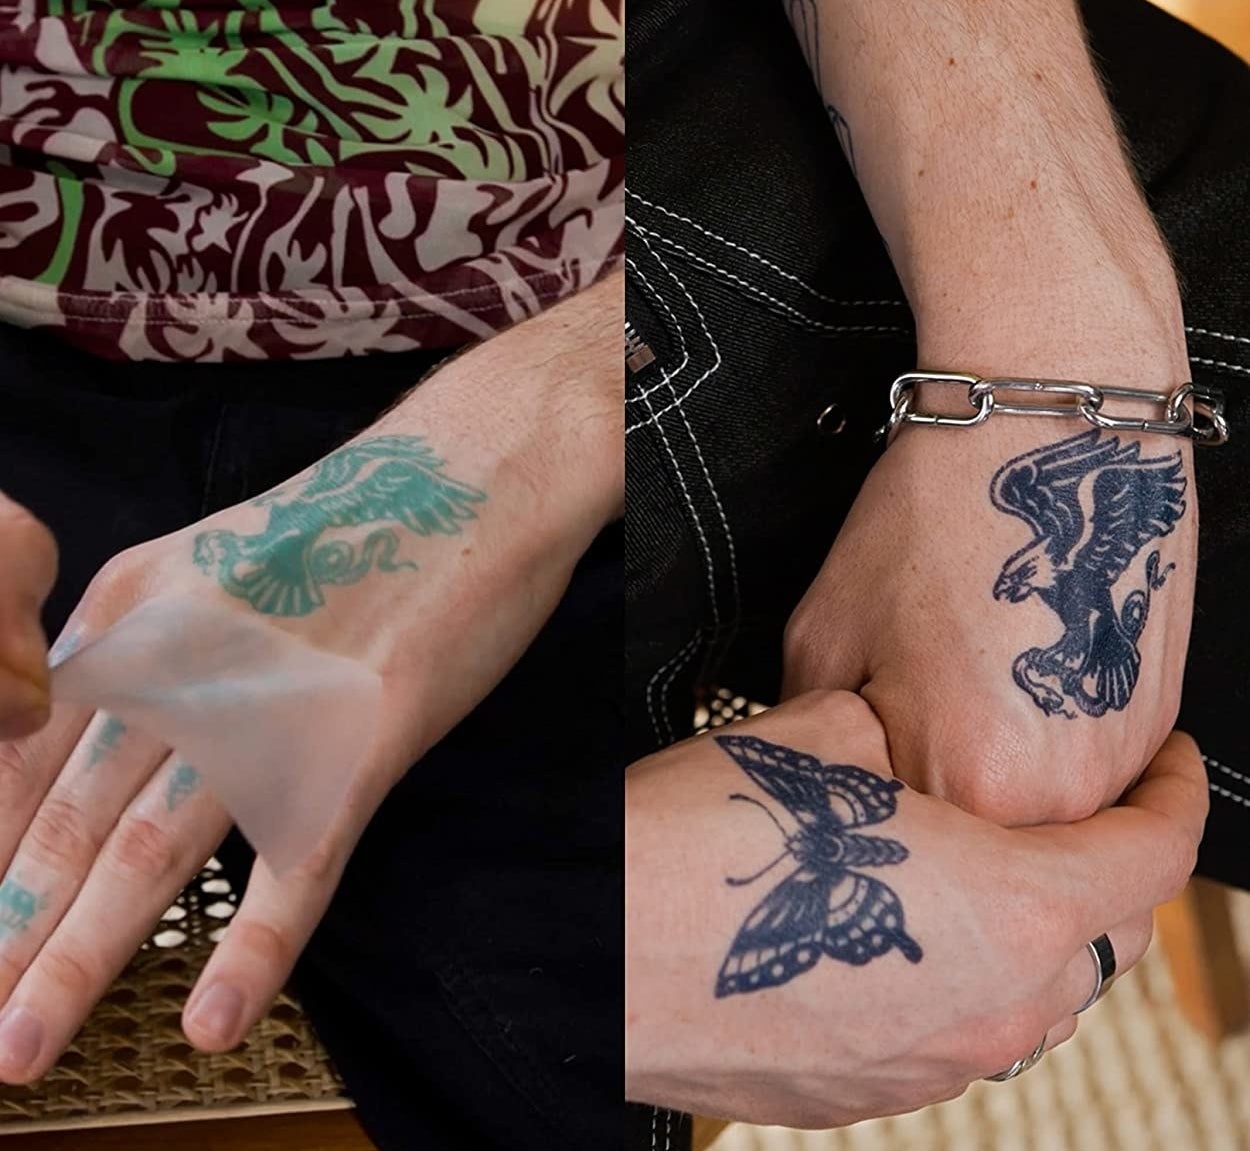 a split photo showing the difference of the tattoo after developing for 24 hours